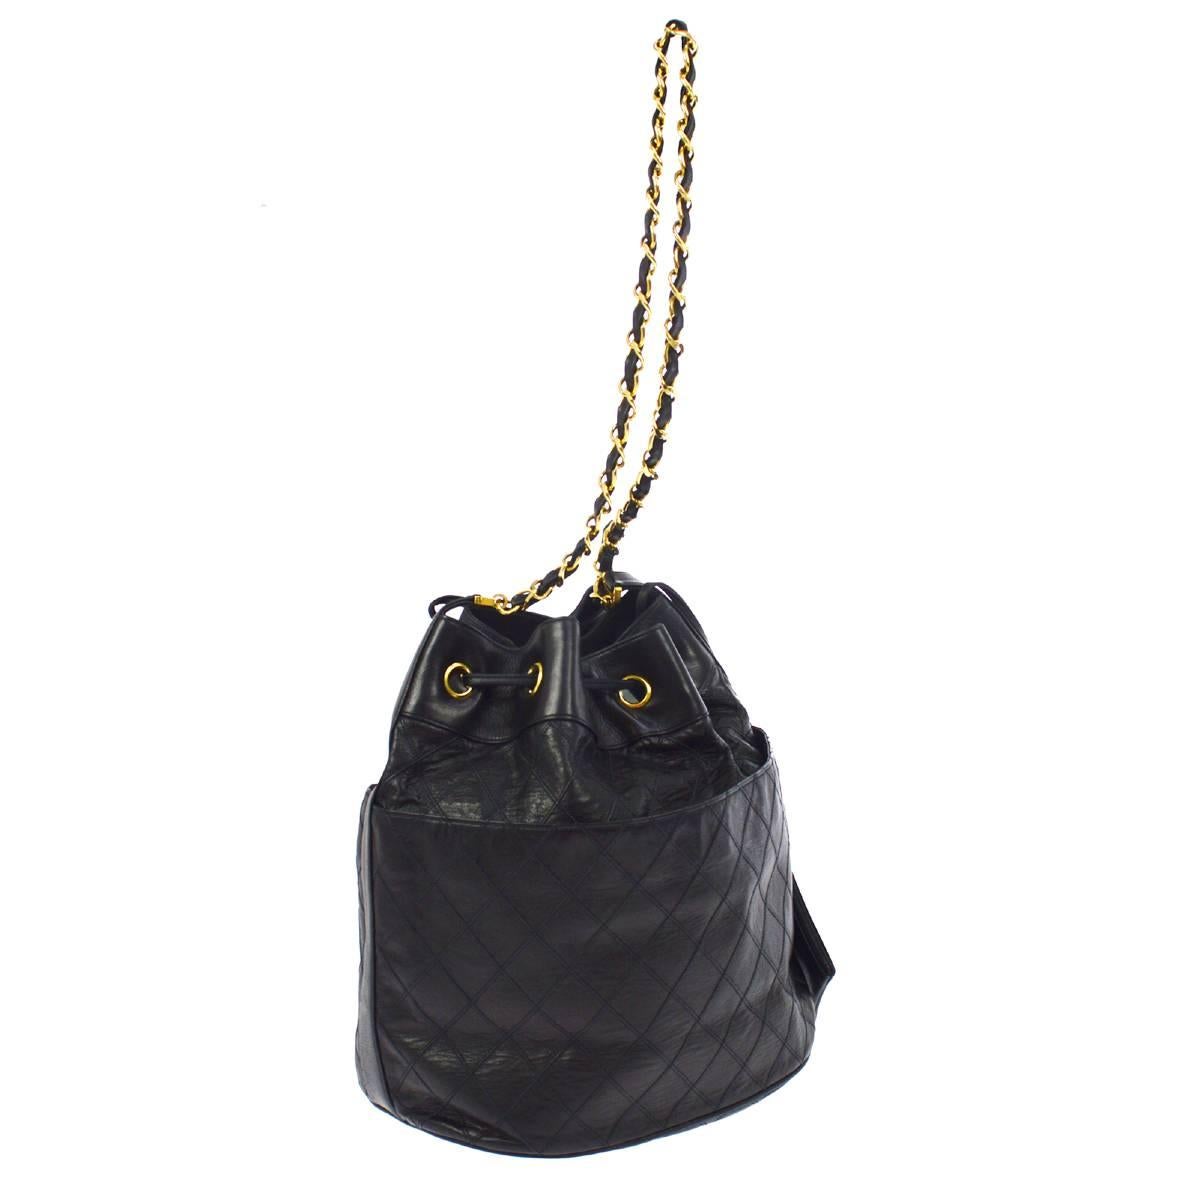 - Vintage 80s Chanel black quilted lambskin bucket shoulder bag. 

- Featuring gold-toned 